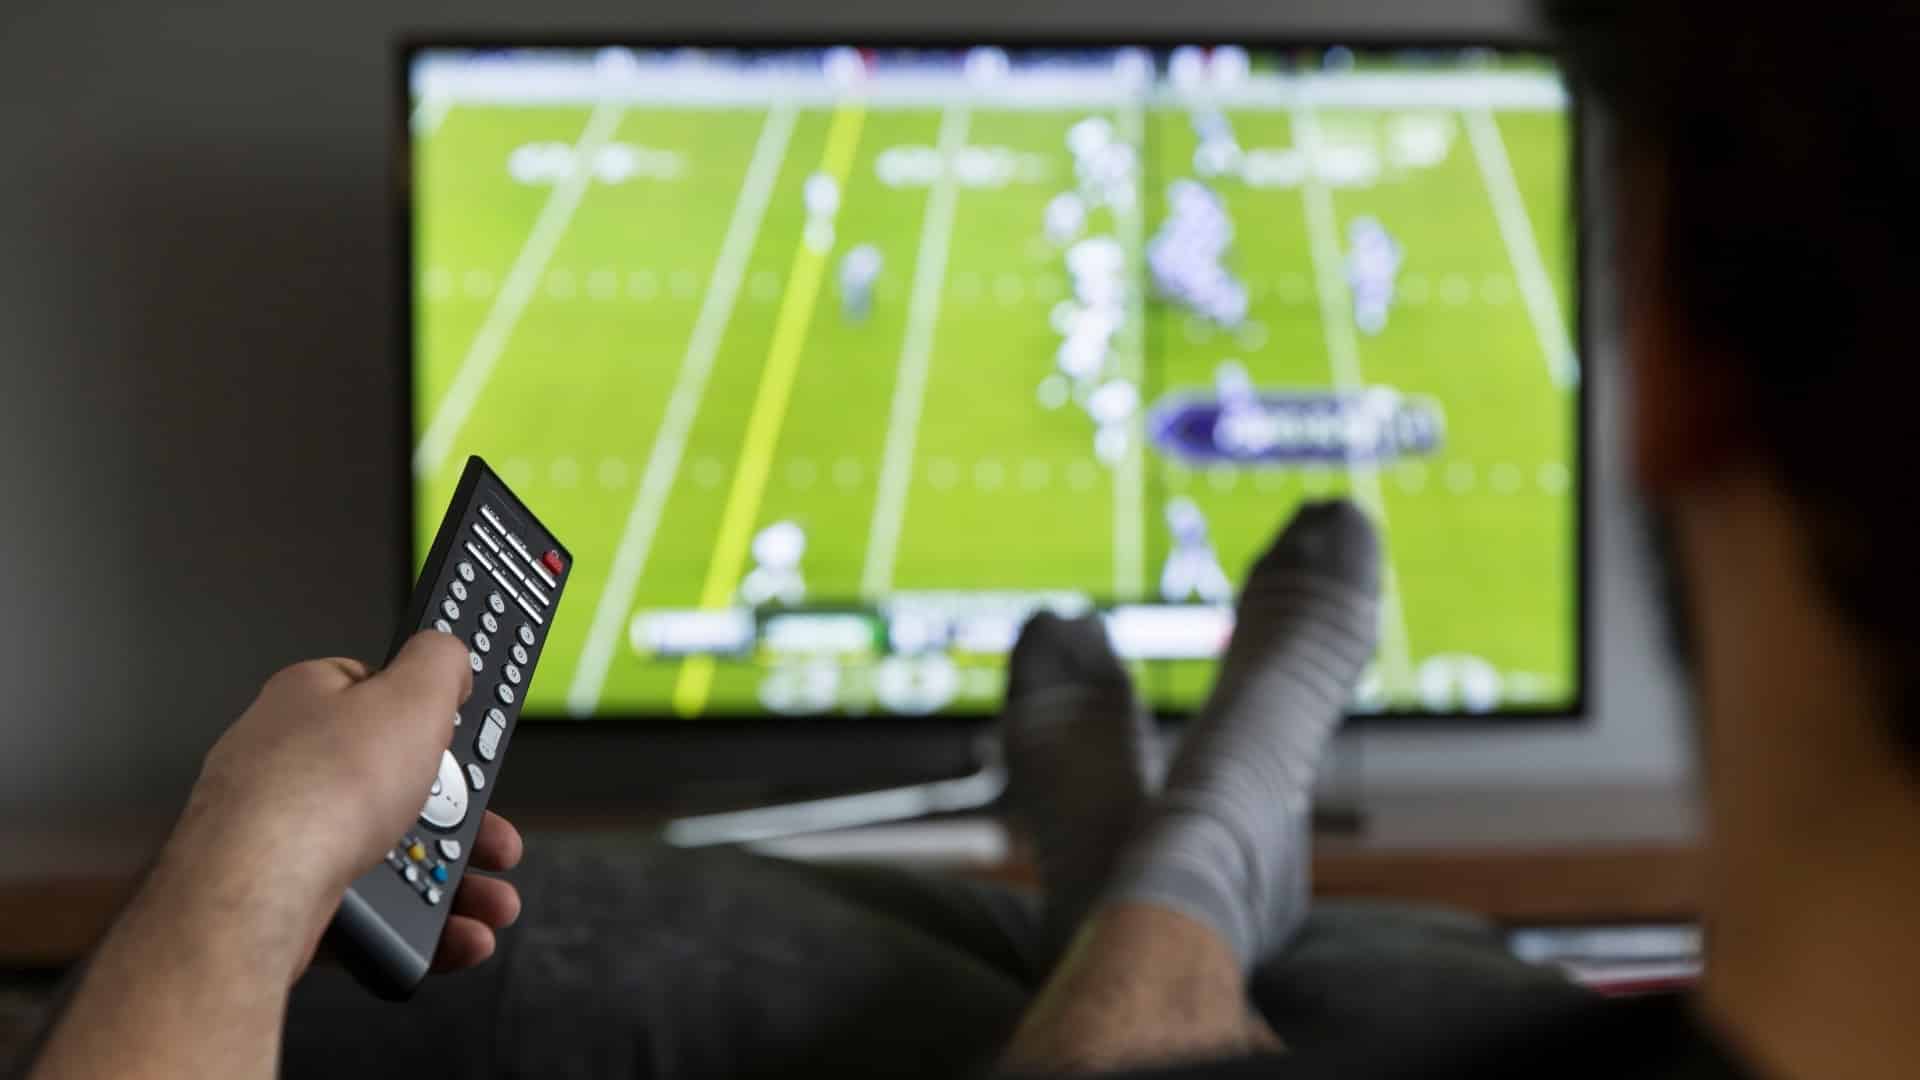 A man watches a football game on television.